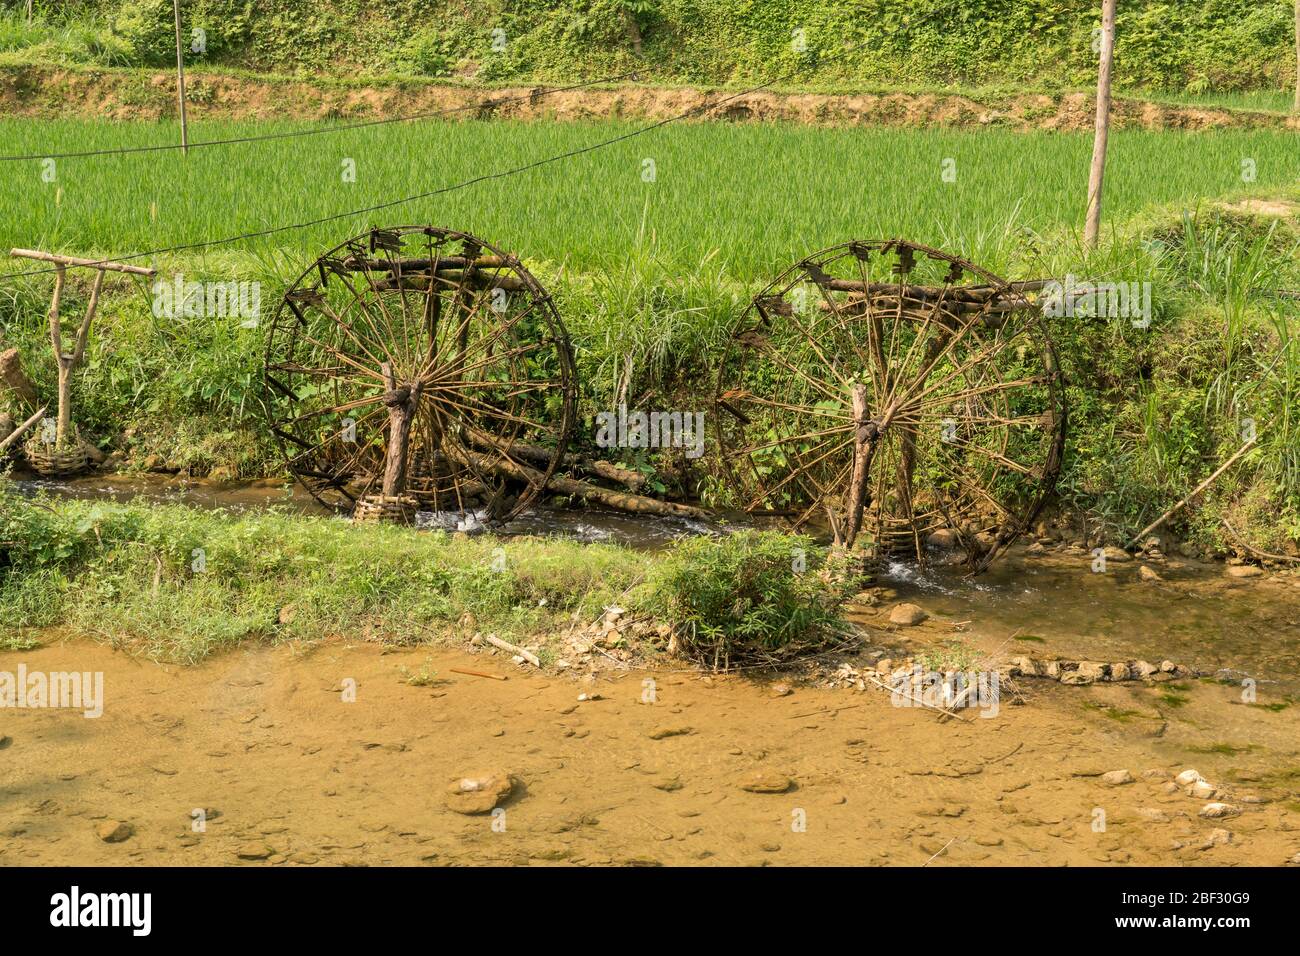 Water wheels driving gravity feed irrigation for the rice terraces at Pu Luong Nature Reserve, Vietnam Stock Photo